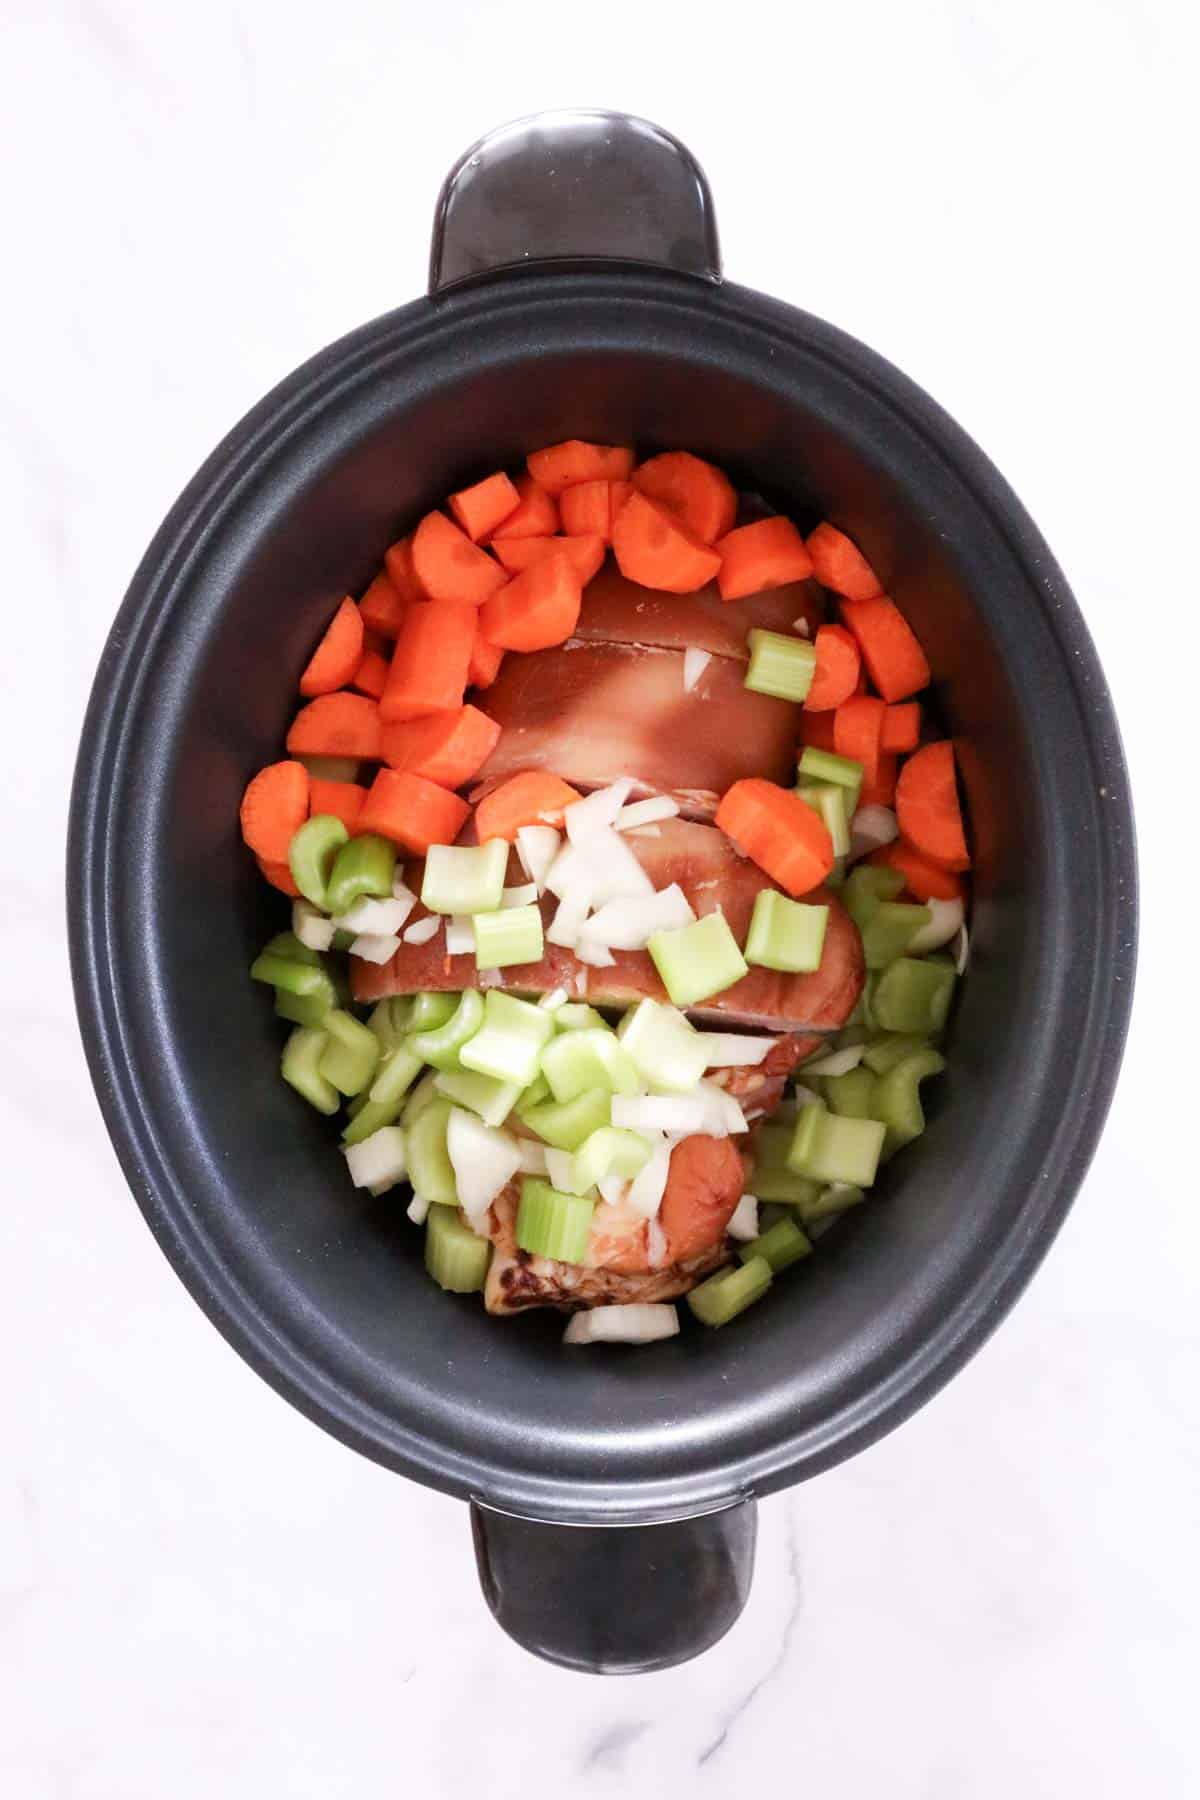 Chopped carrots, celery and onion placed on top of the ham hock in the slow cooker bowl.